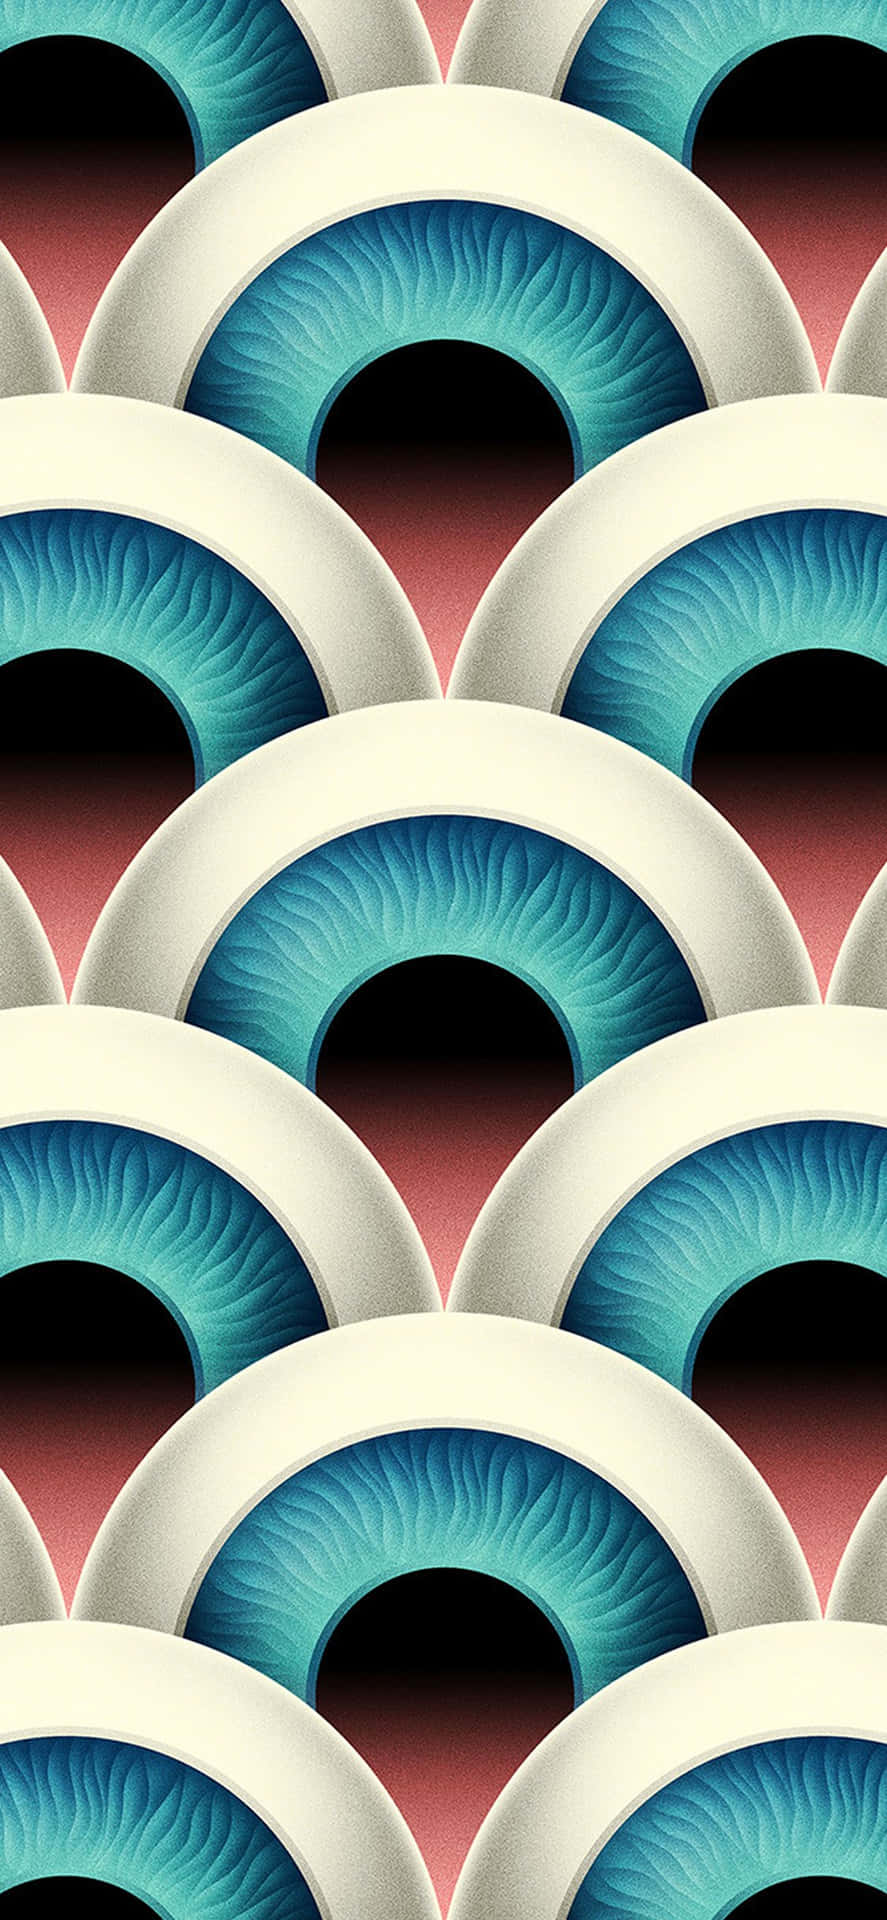 The Intriguing Duplicitous Eyes Wallpaper